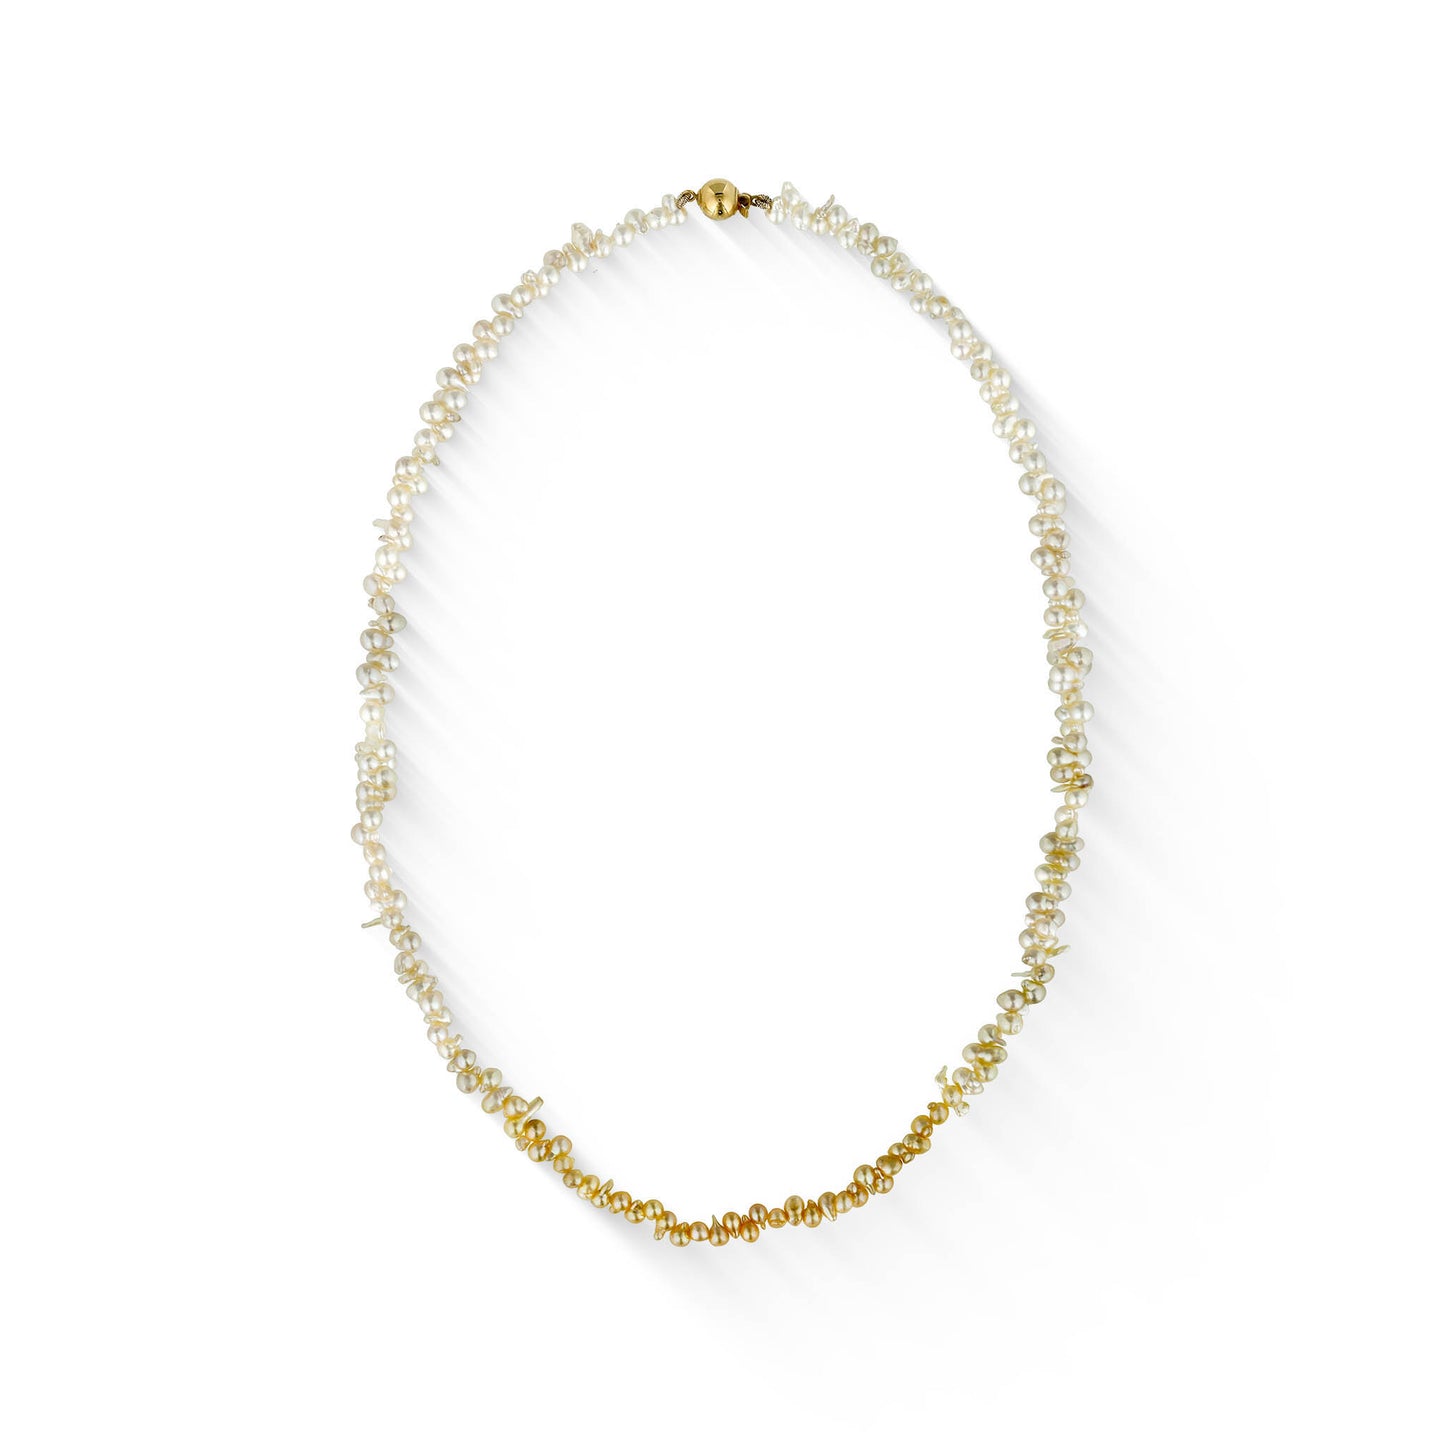 773466 - 14K Yellow Gold - White and Gold Akoya Pearl Cleopatra Necklace